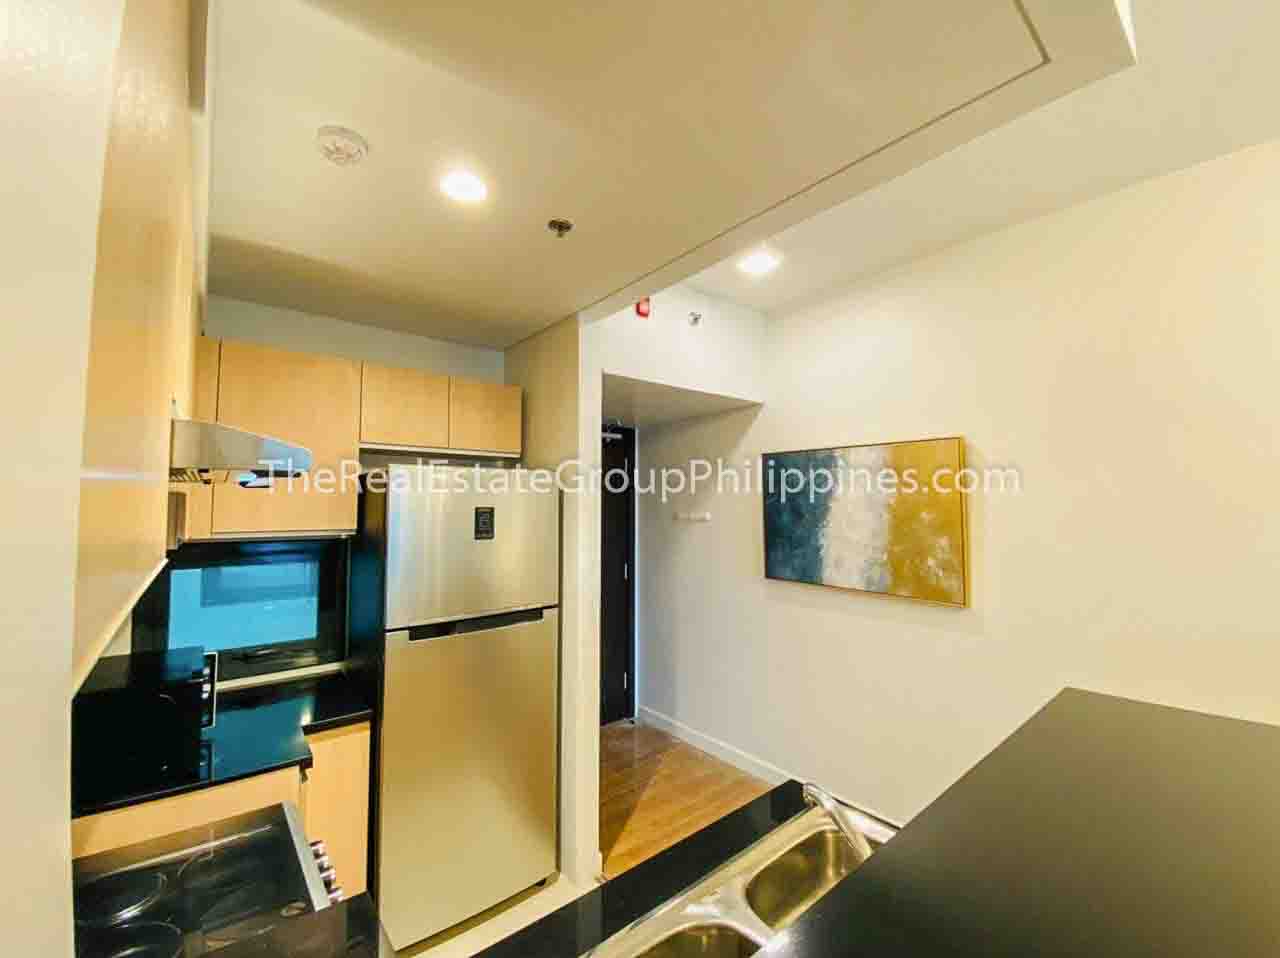 Two Bedroom Condo For Rent Lease Carmona Makati